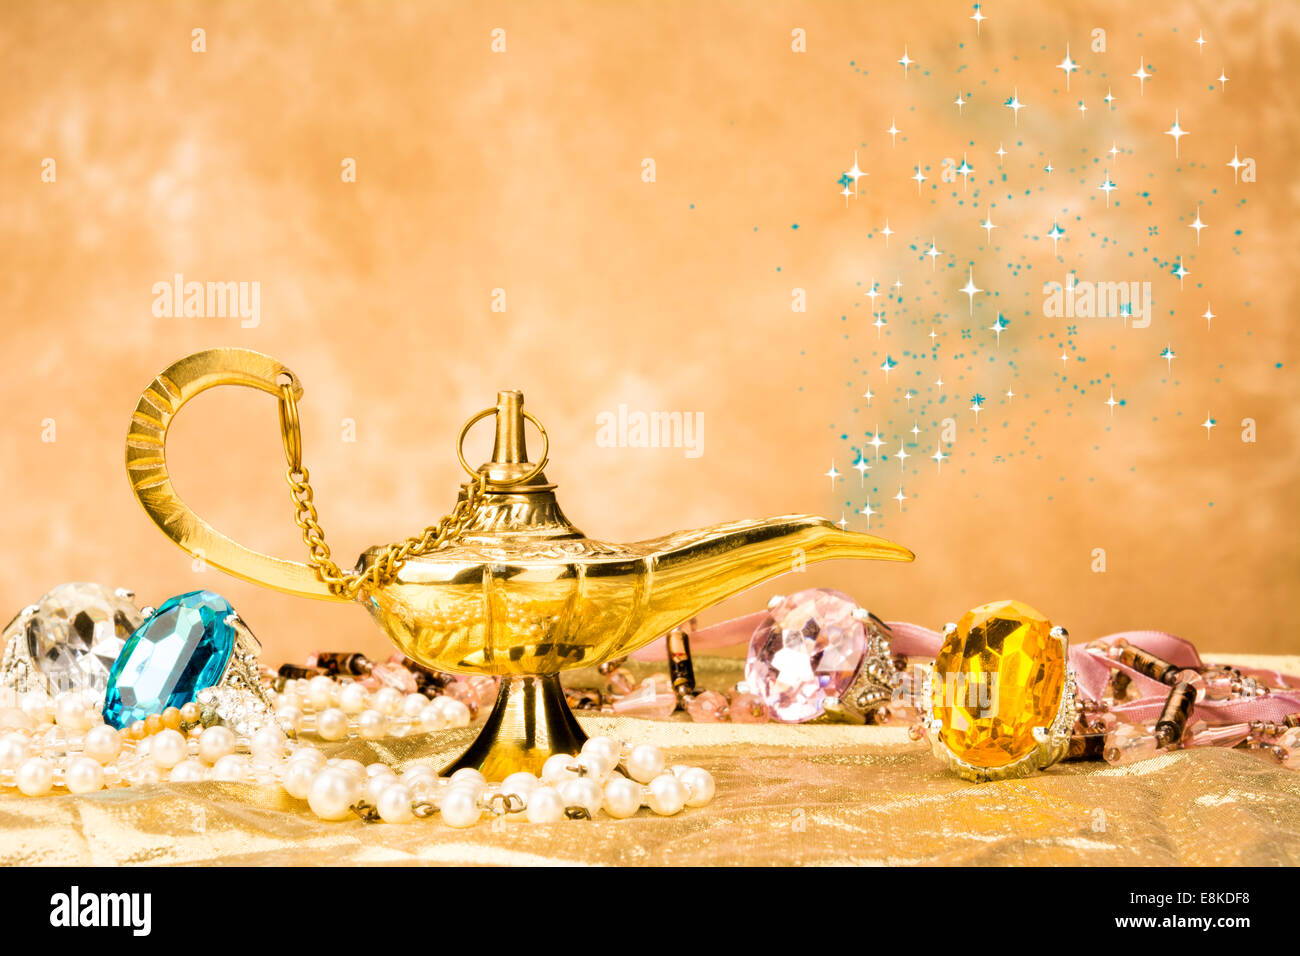 The formation of a magical deity from a gold, magic lamp surrounded by a wealth of jewelry and fantasy. Stock Photo